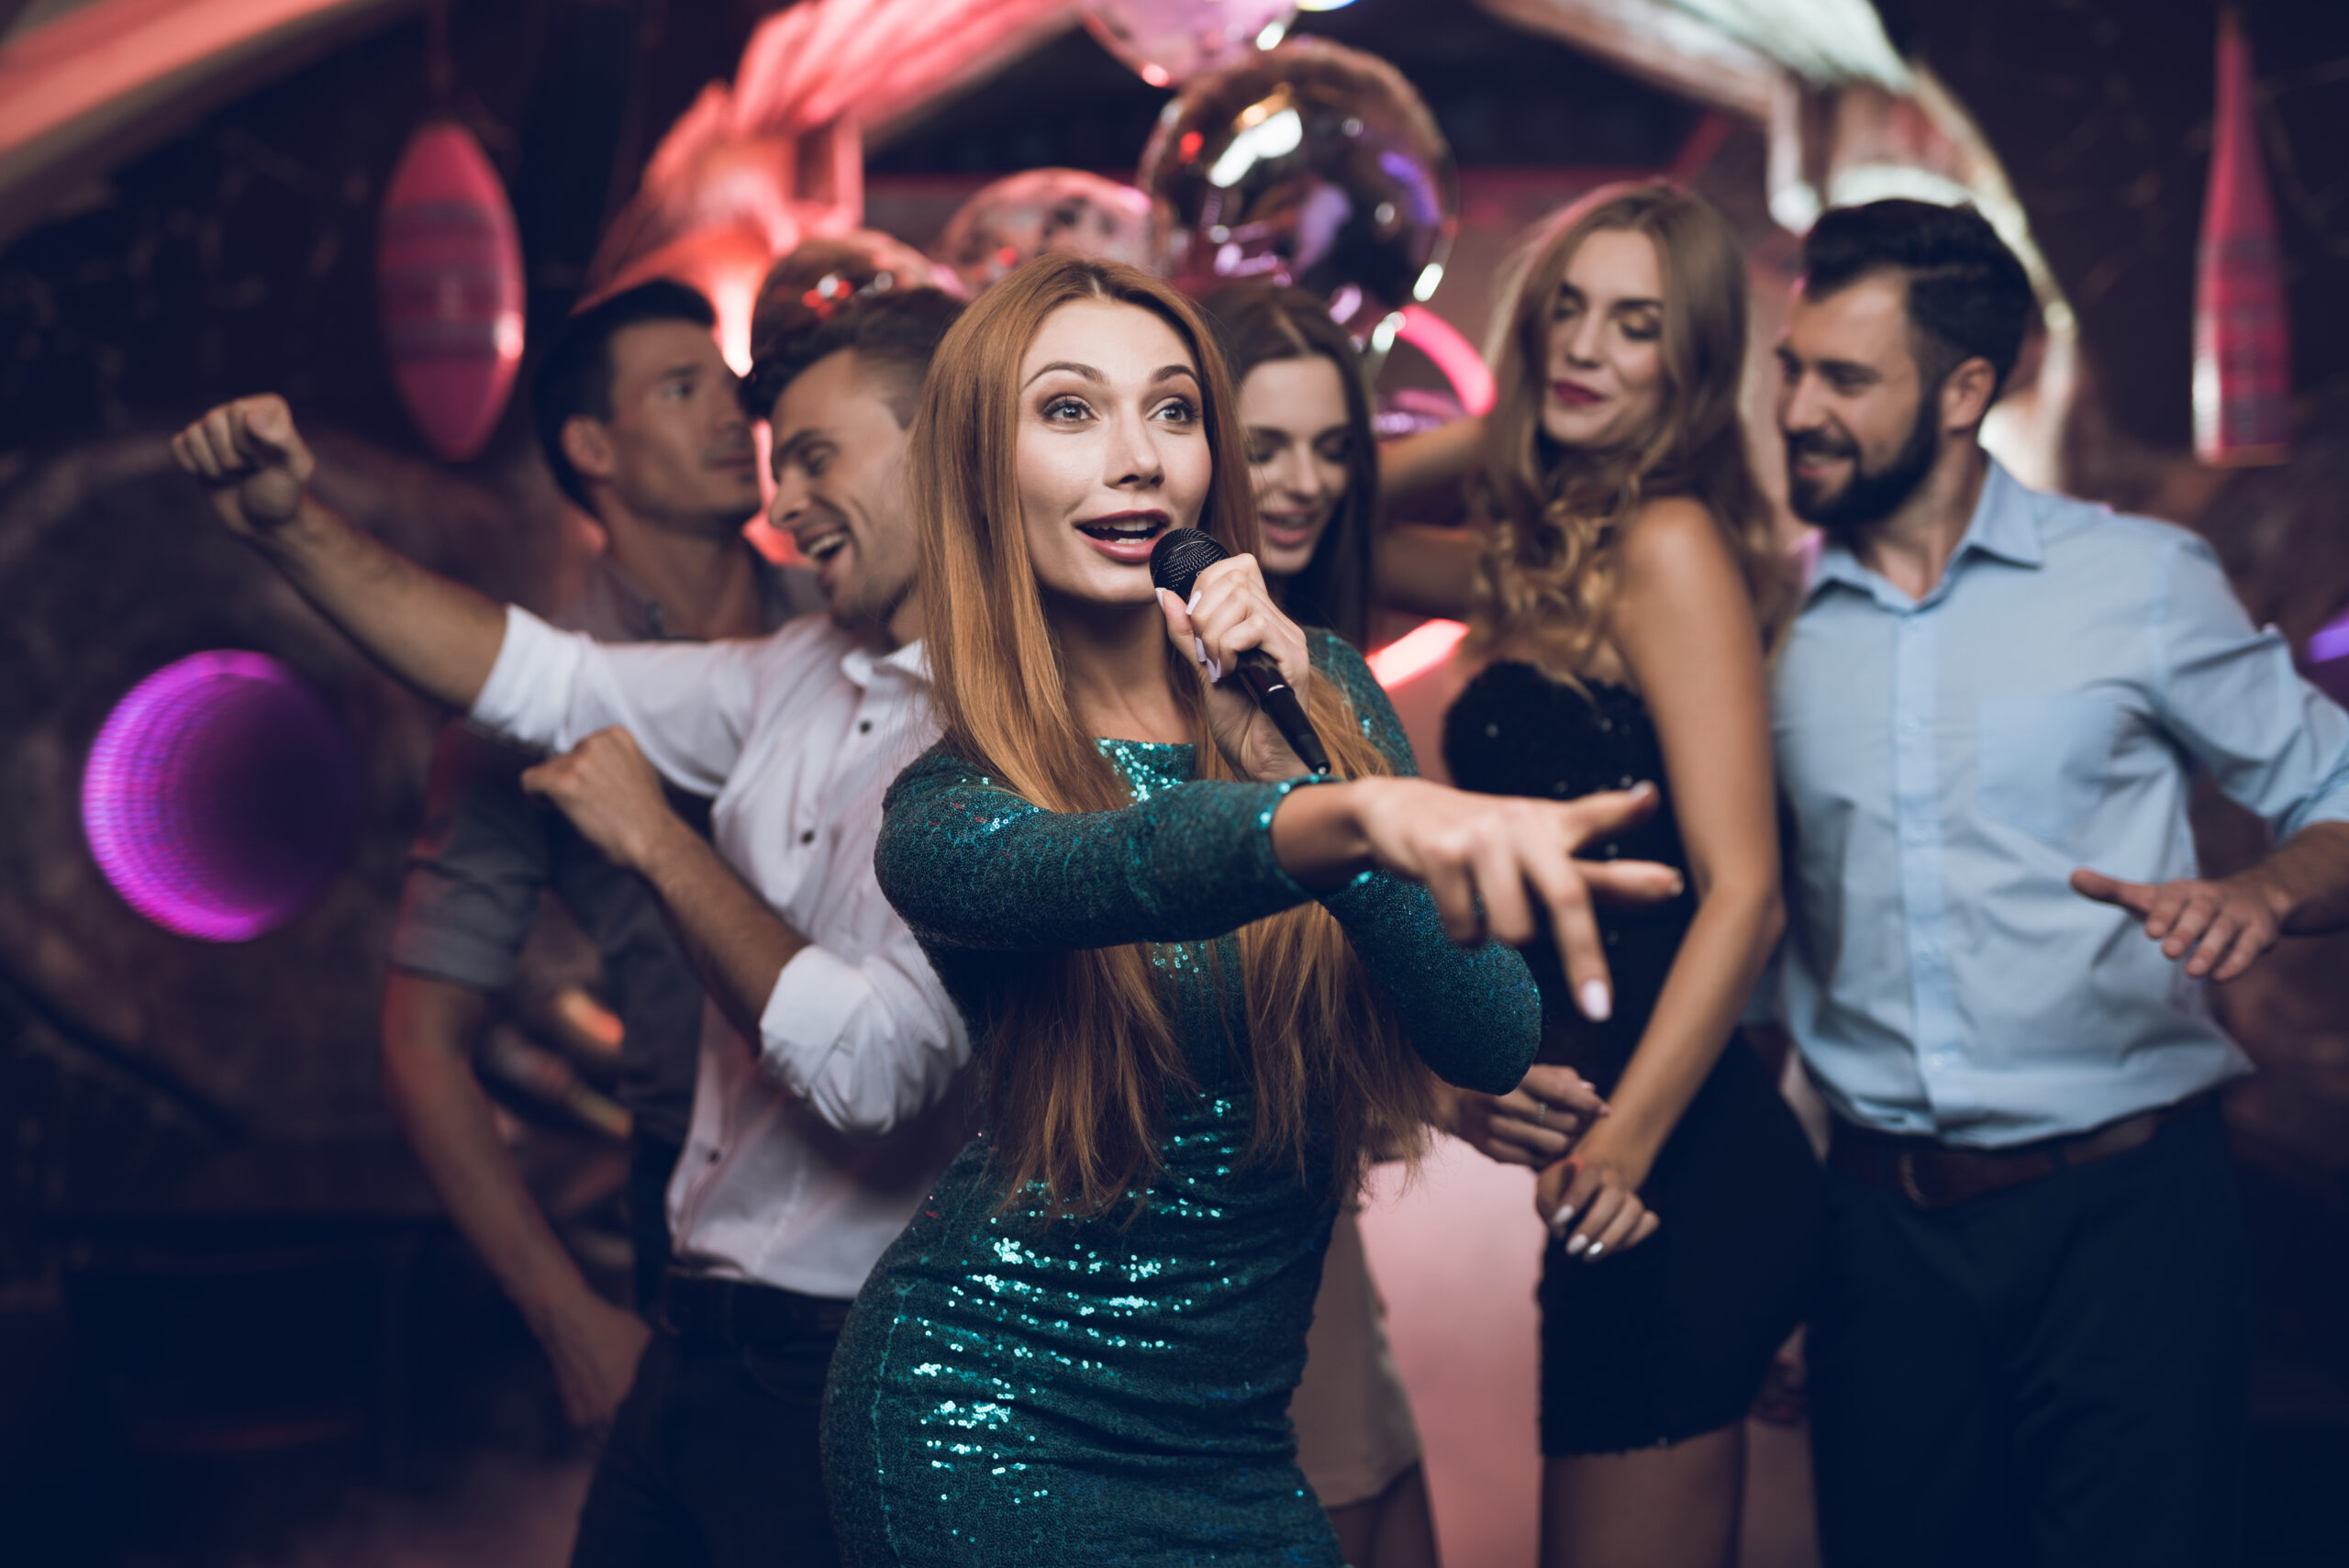 4 Reasons to Have Karaoke at Your Next Party